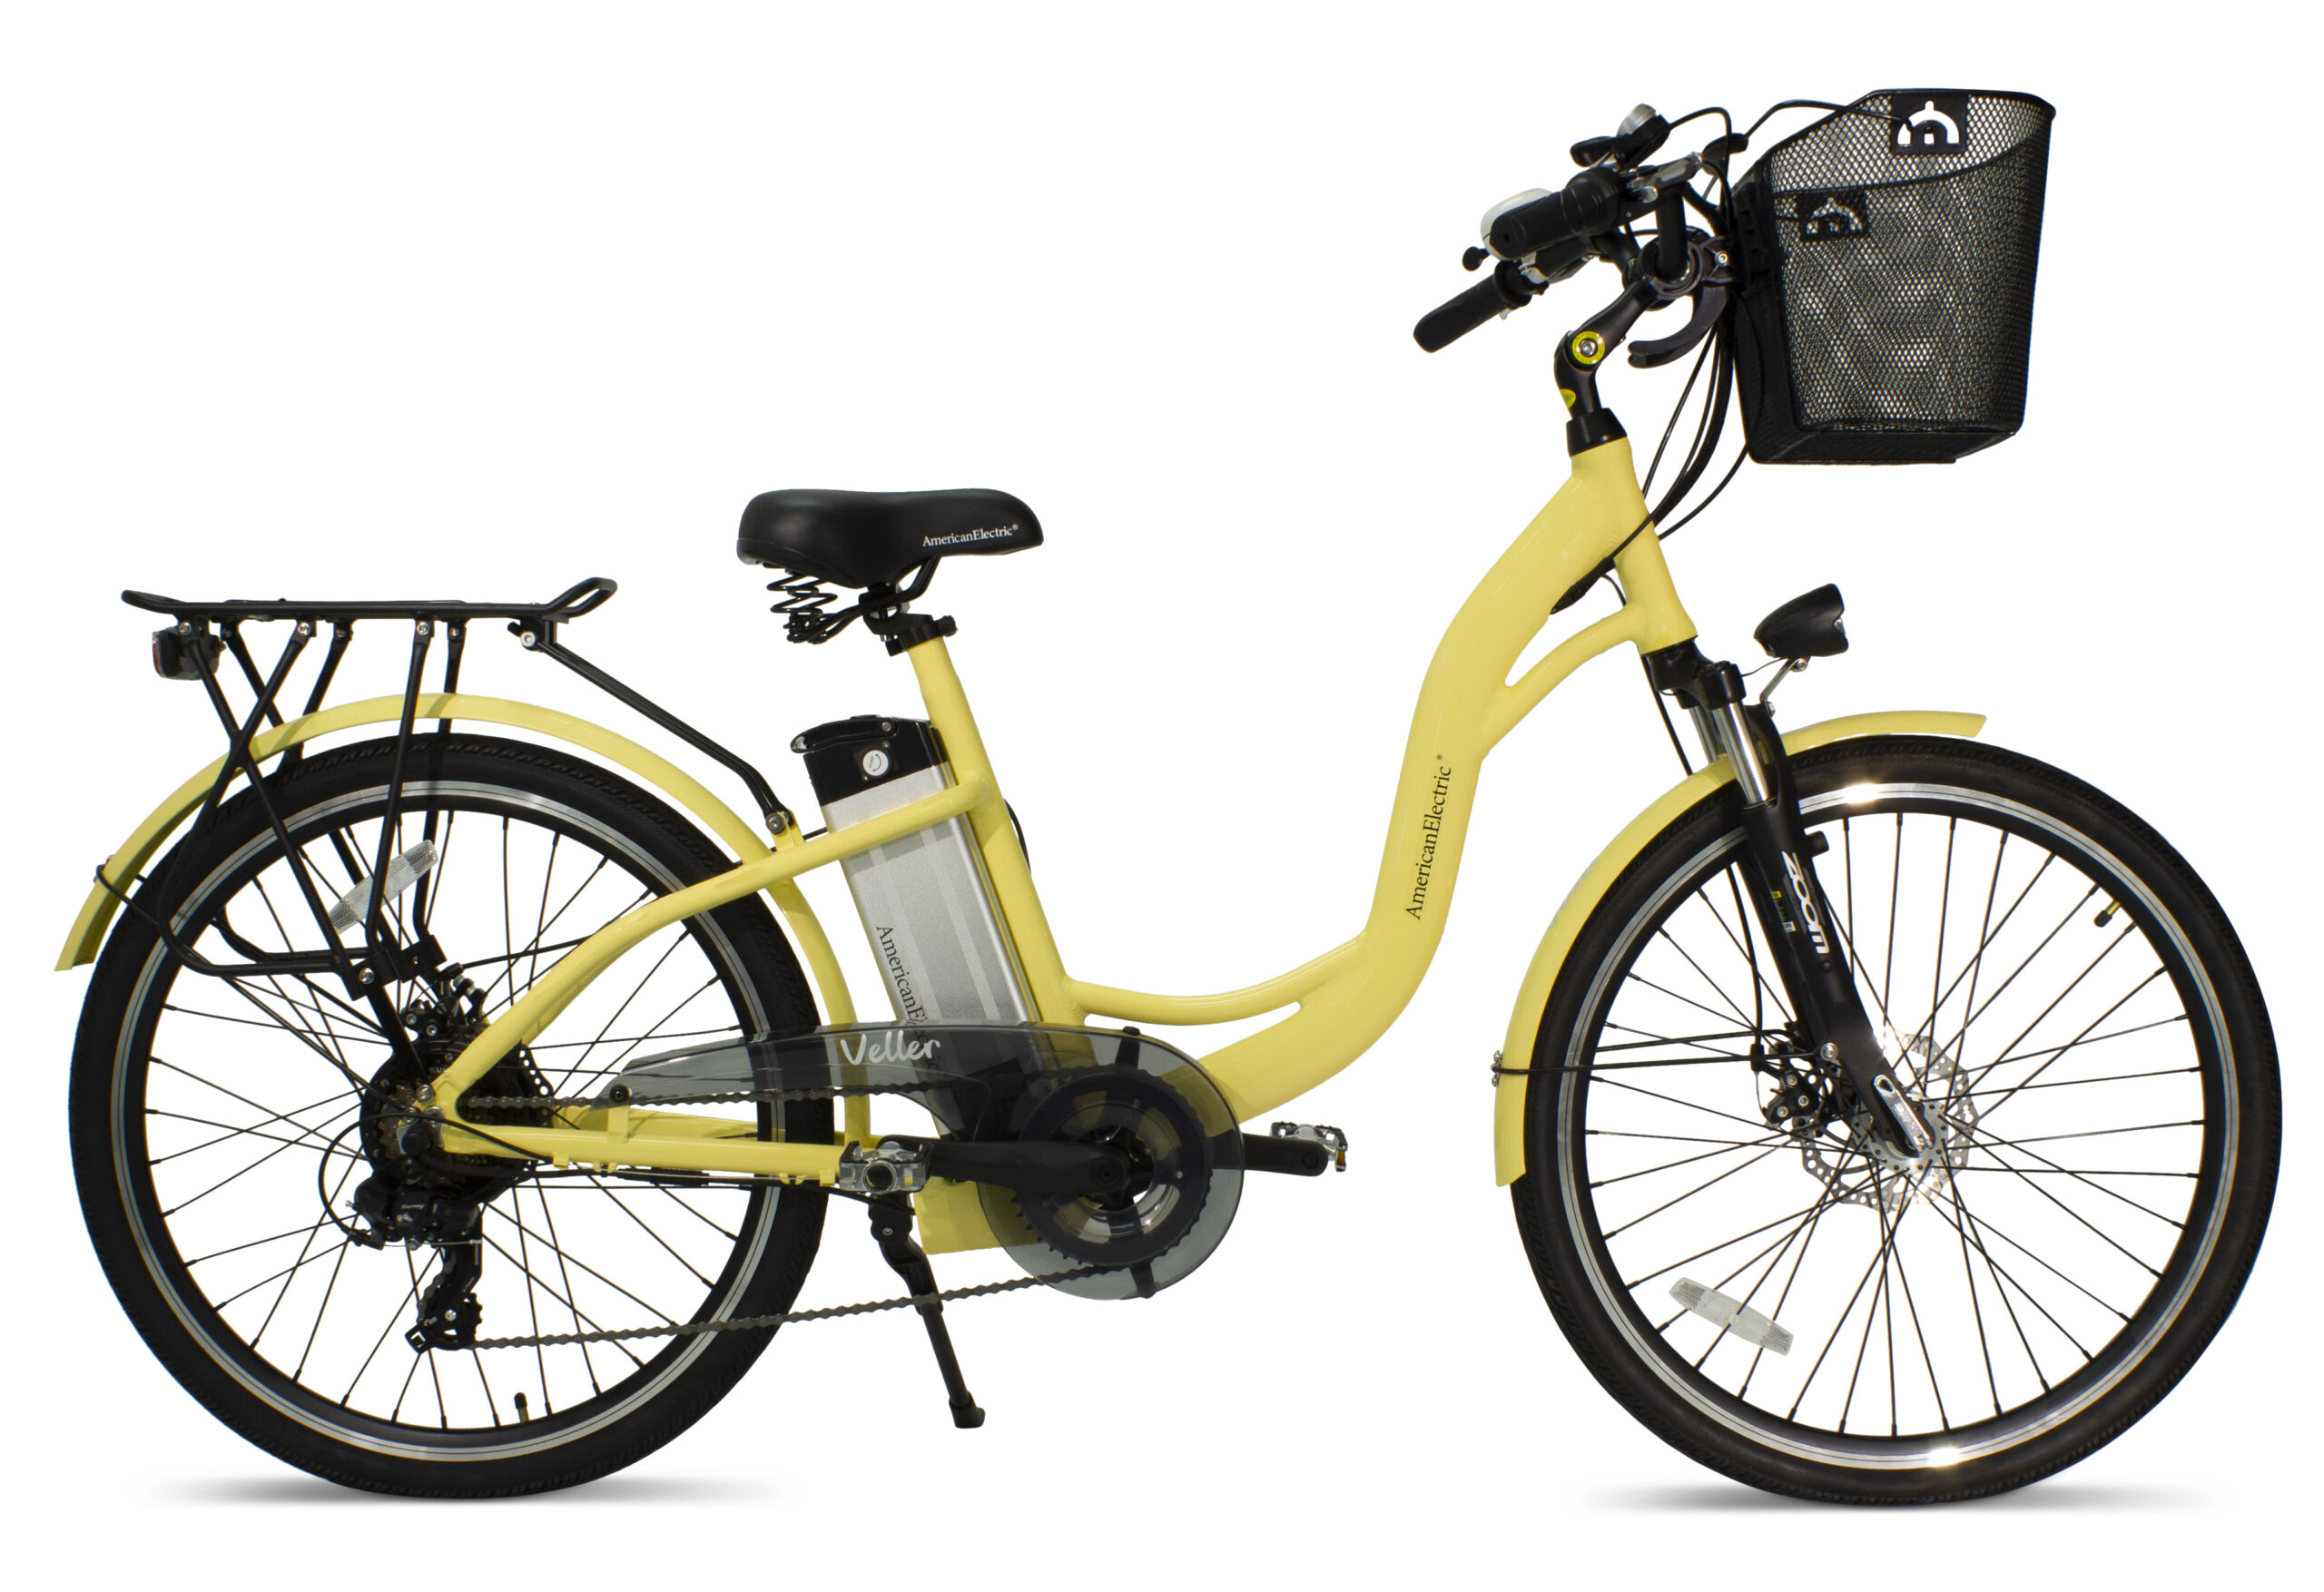 American Electric Veller - Rent at the Cycle Haus